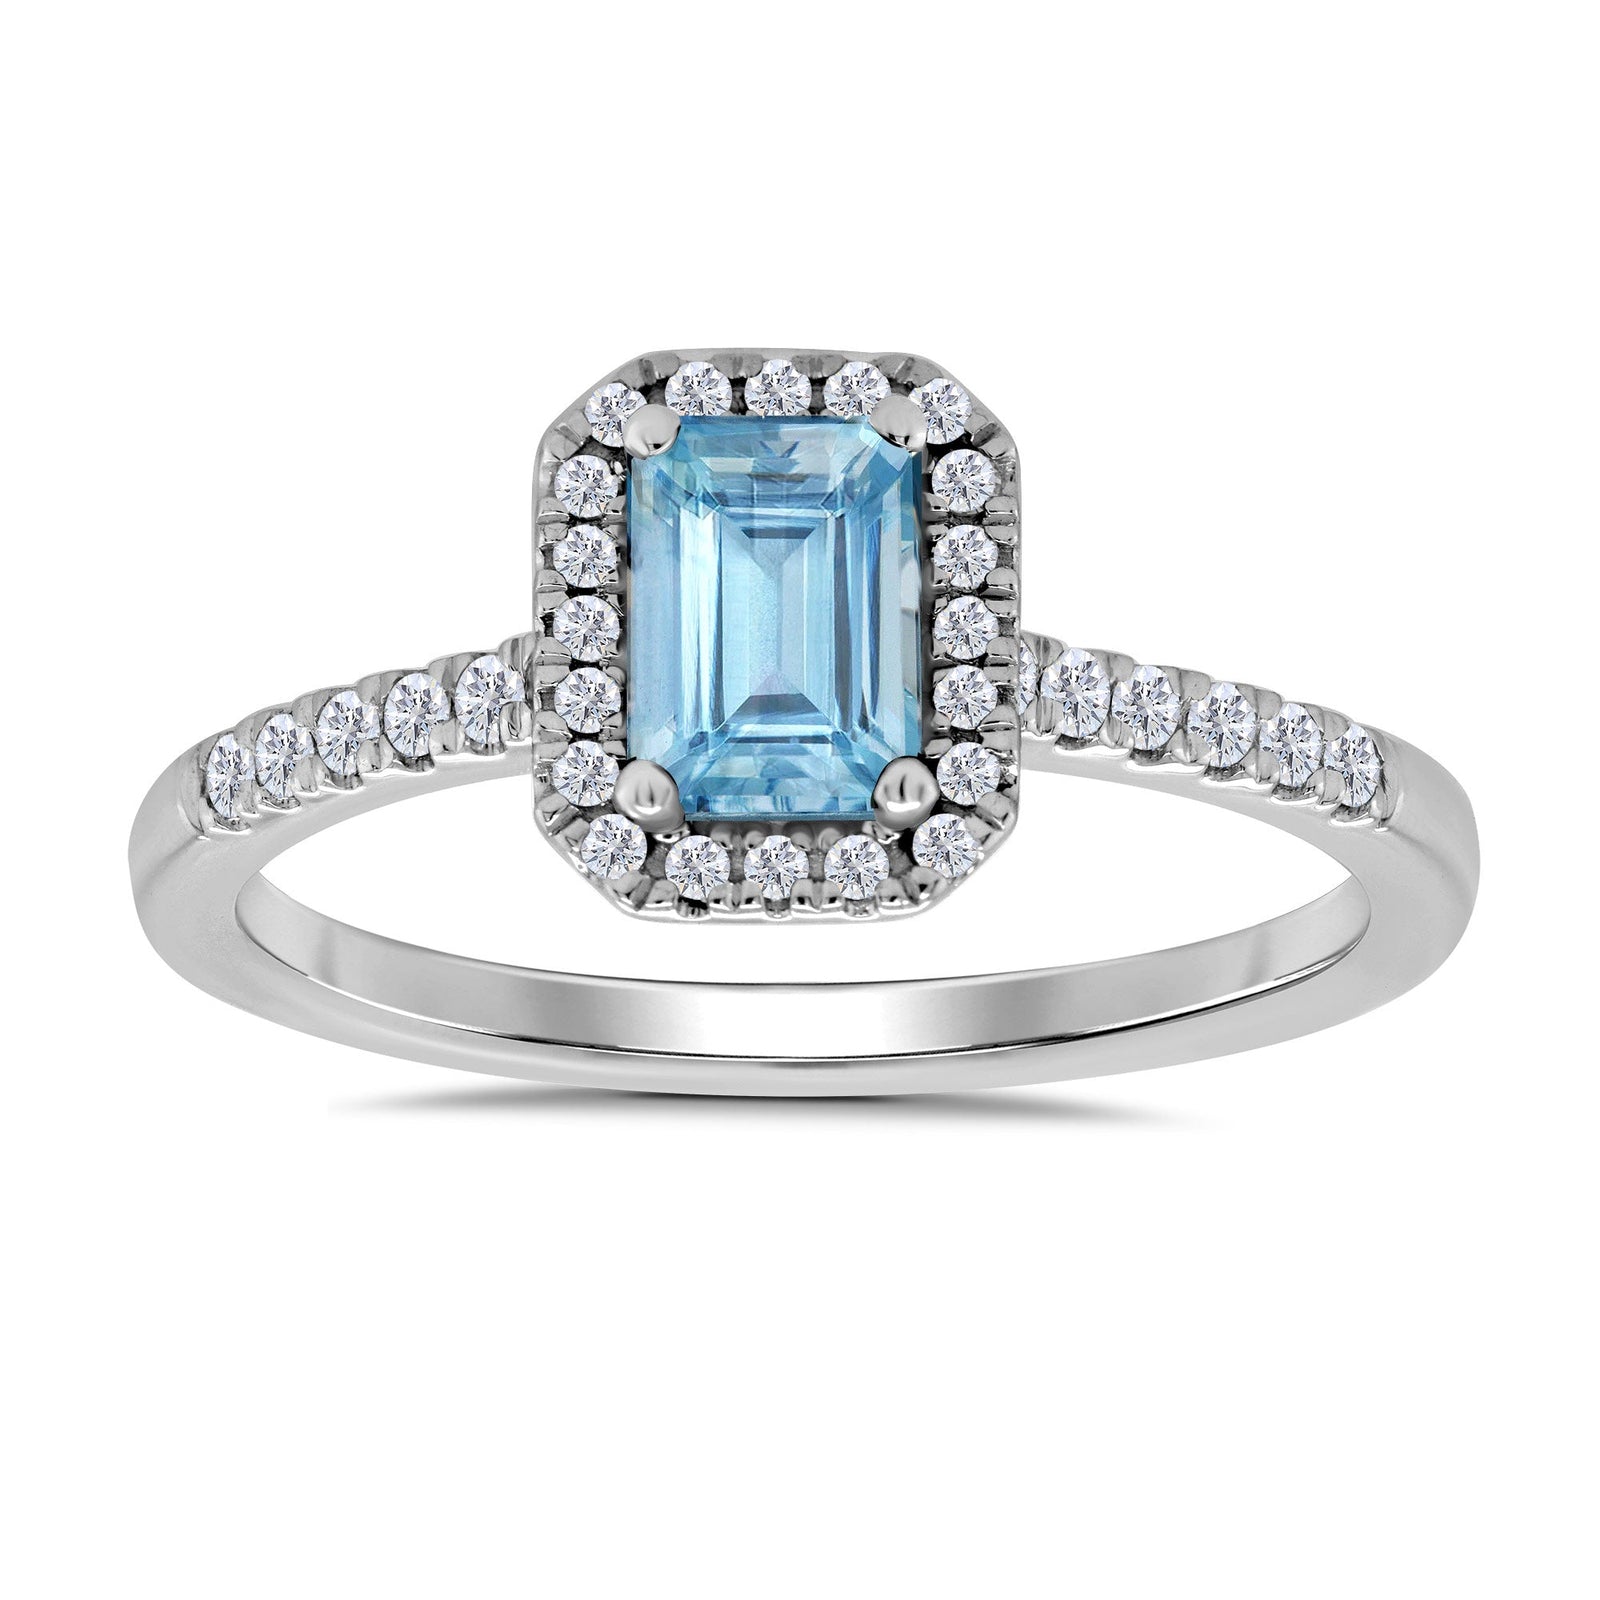 9ct white gold 6x4mm octagon cut aquamarine & diamond cluster ring with diamond shoulders 0.20ct